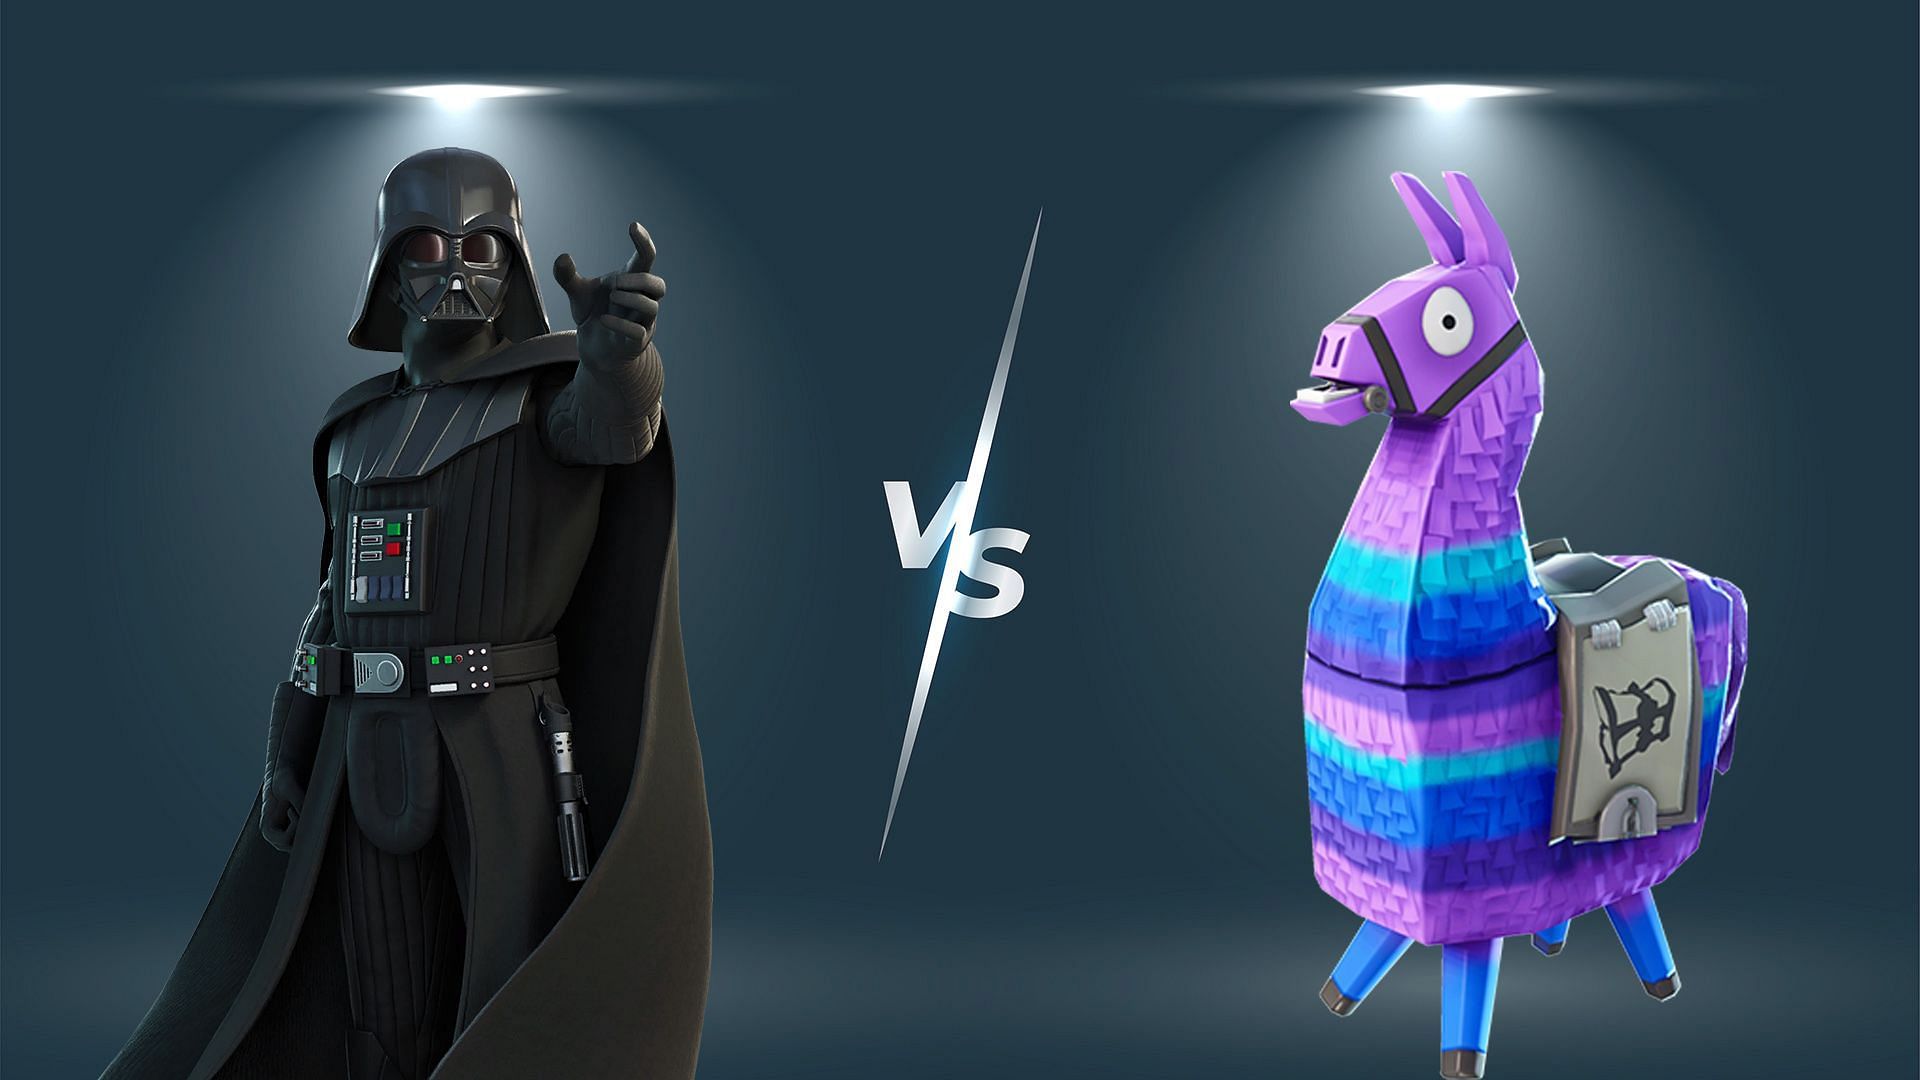 Darth Vader faced a Supply Llama in what turned out to be an interesting fight (Image via Sportskeeda)